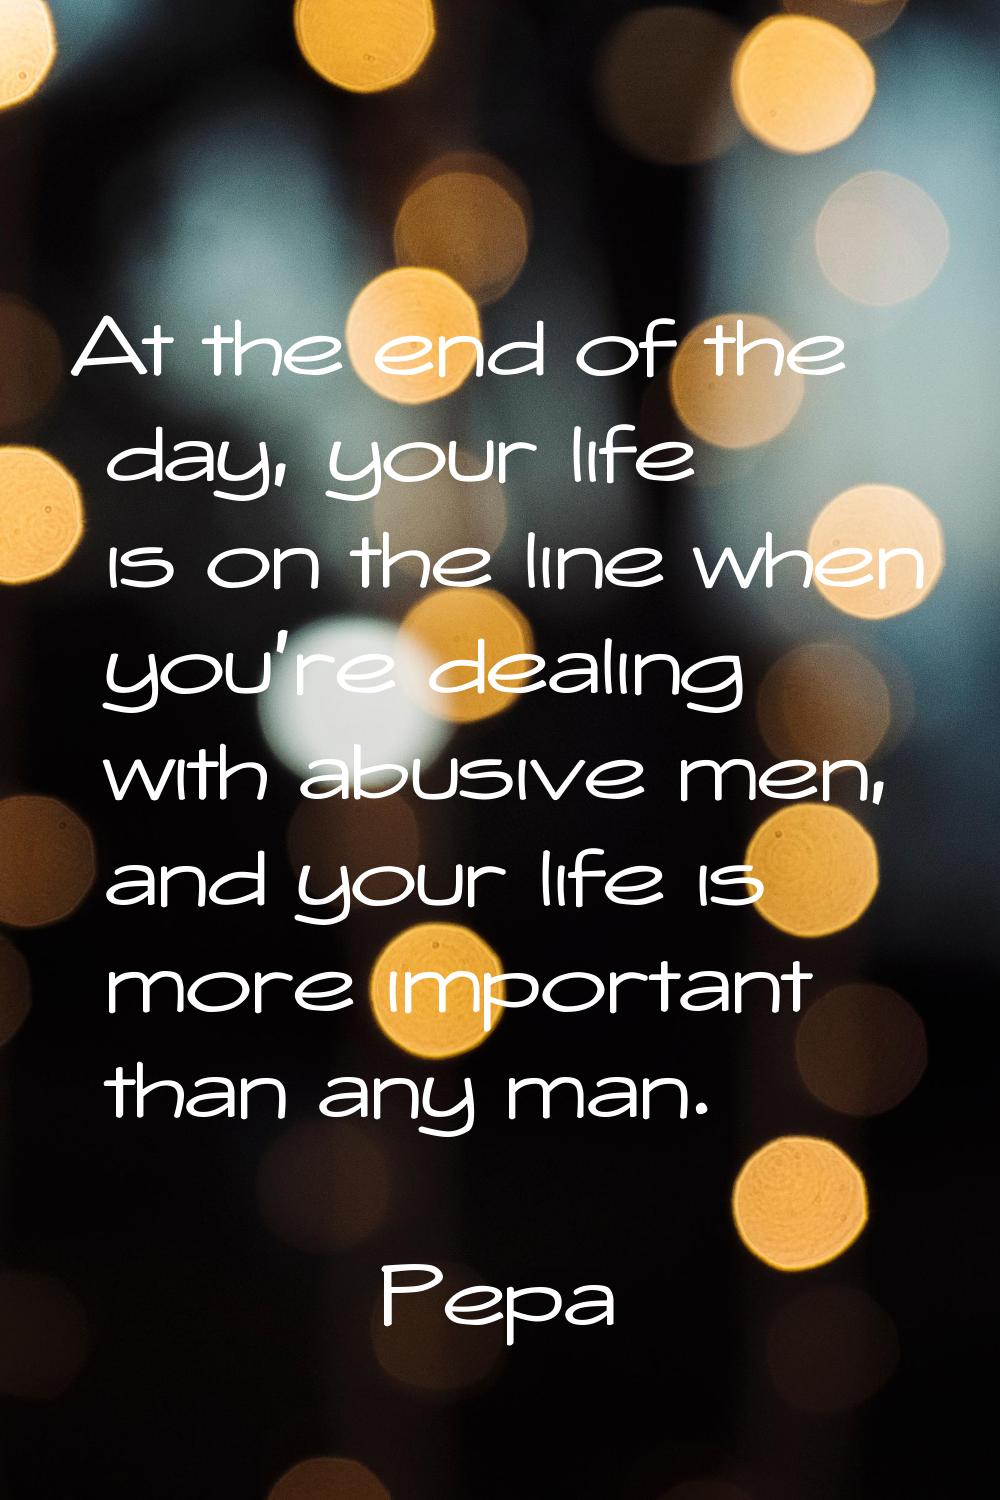 At the end of the day, your life is on the line when you're dealing with abusive men, and your life